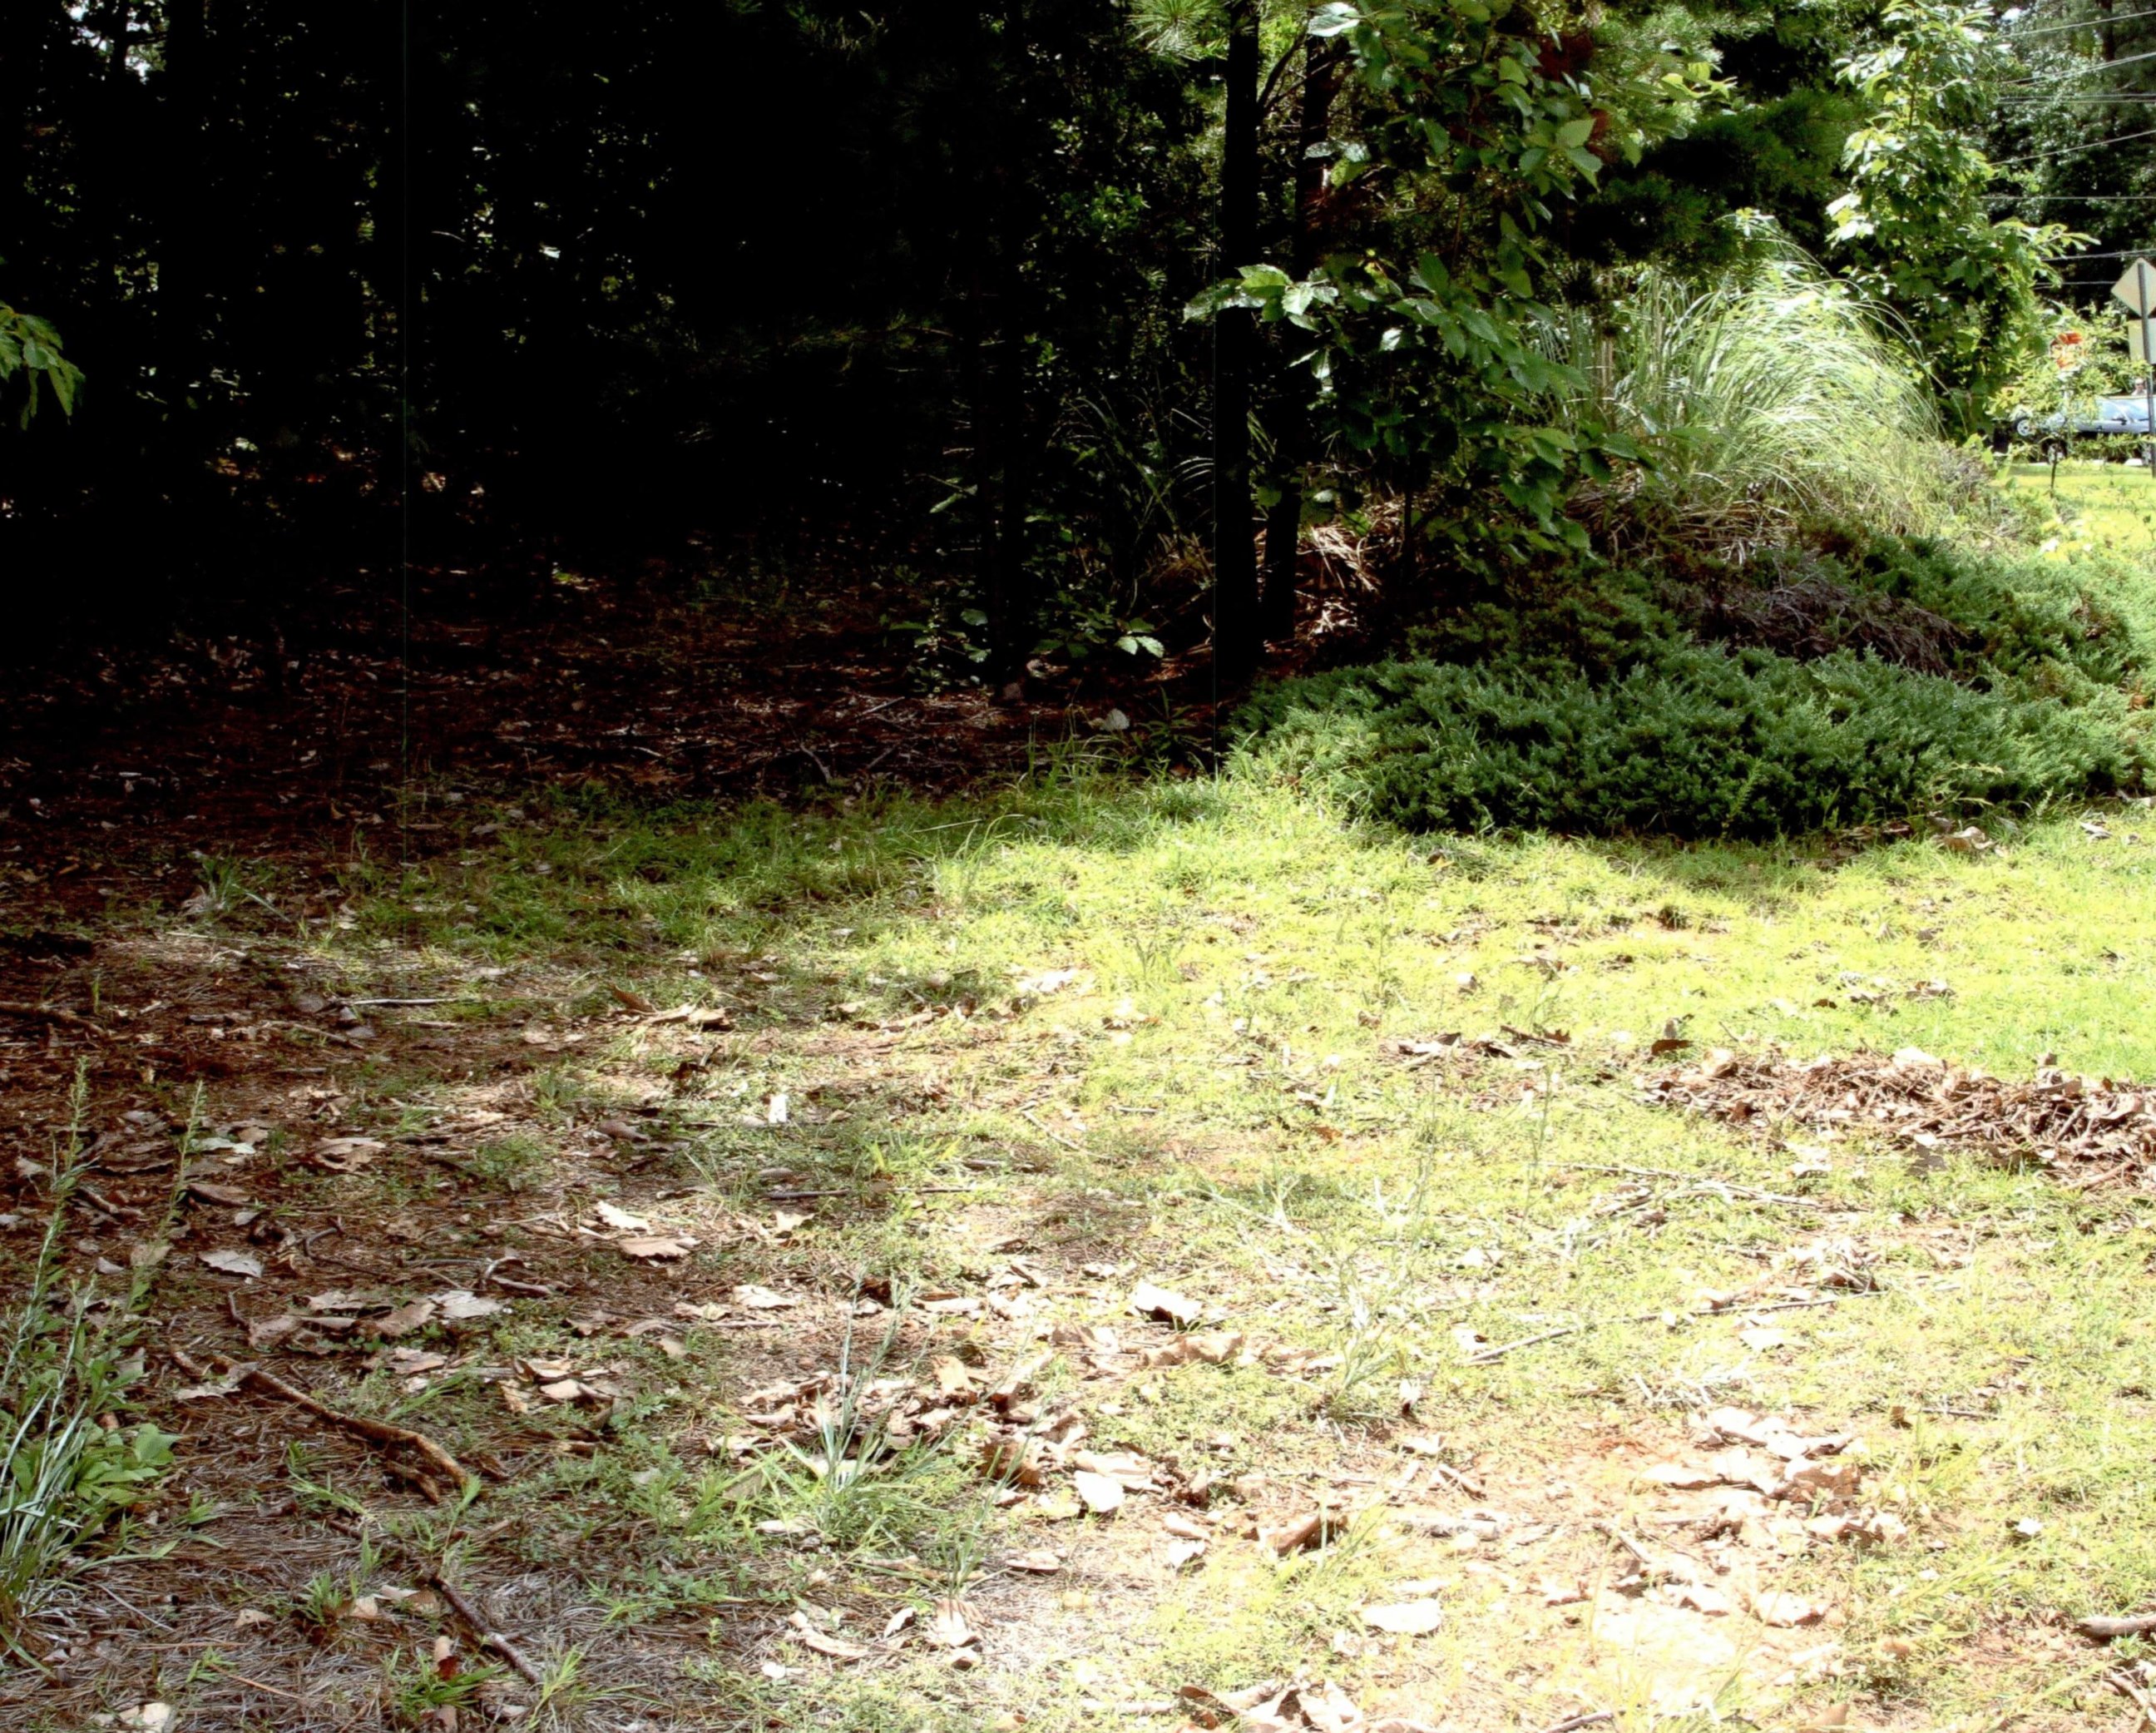 The woods where Nique Leili's body was found covered in dead leaves and branches, located less than a mile from the family home.